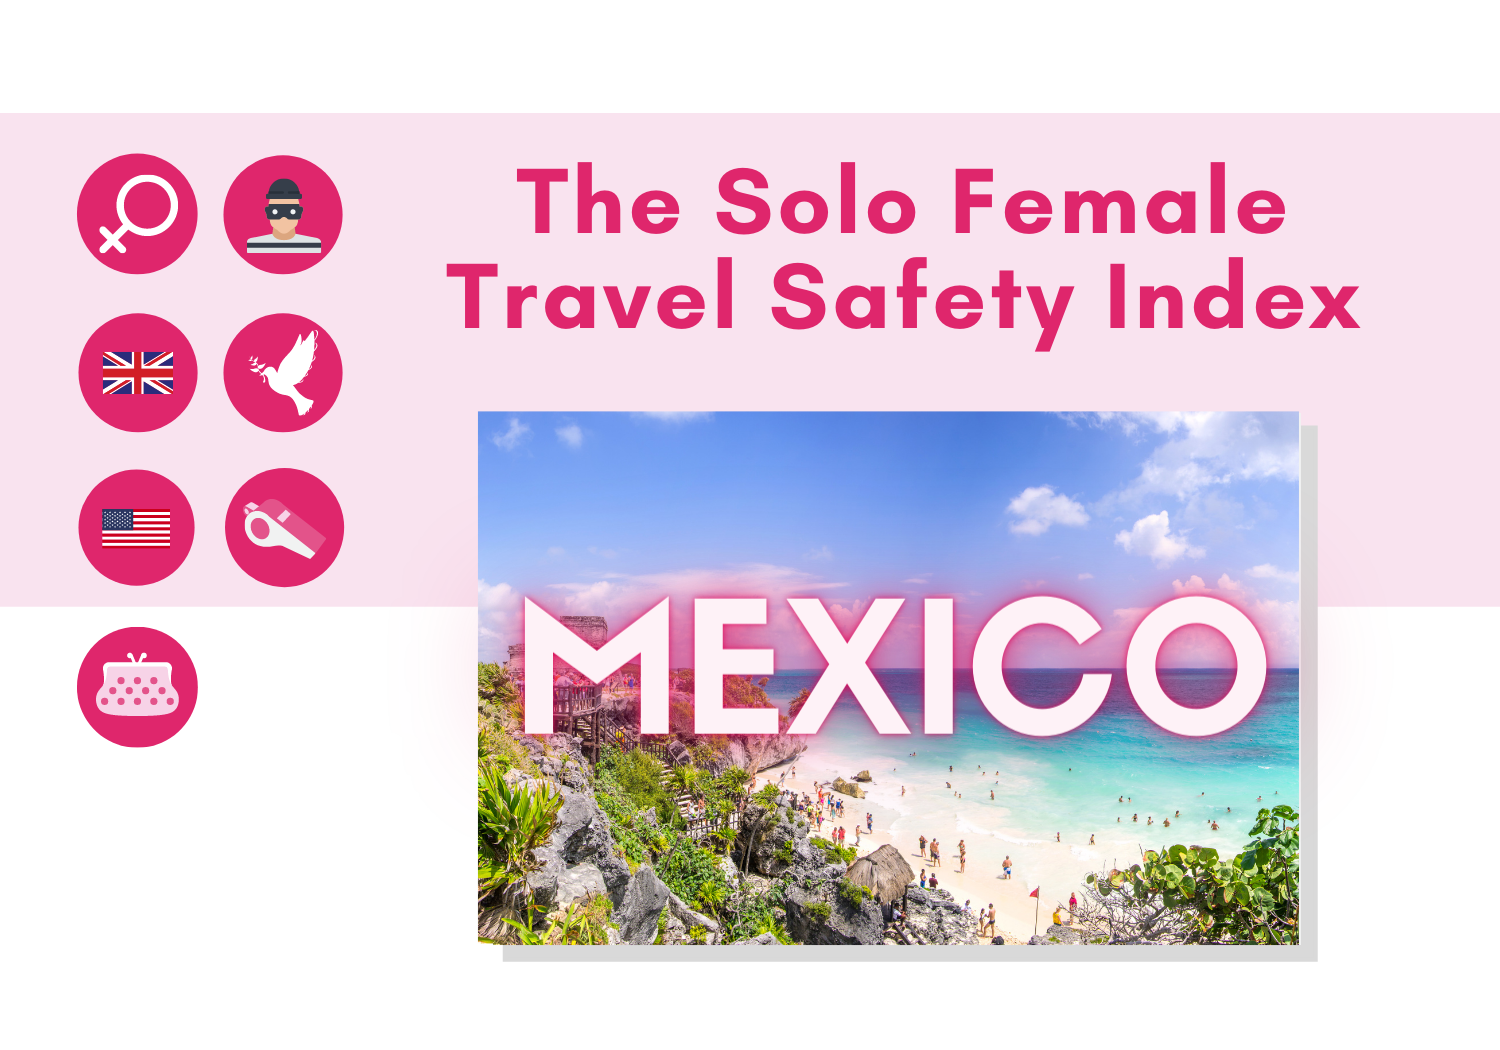 Solo female travel safety in Mexico